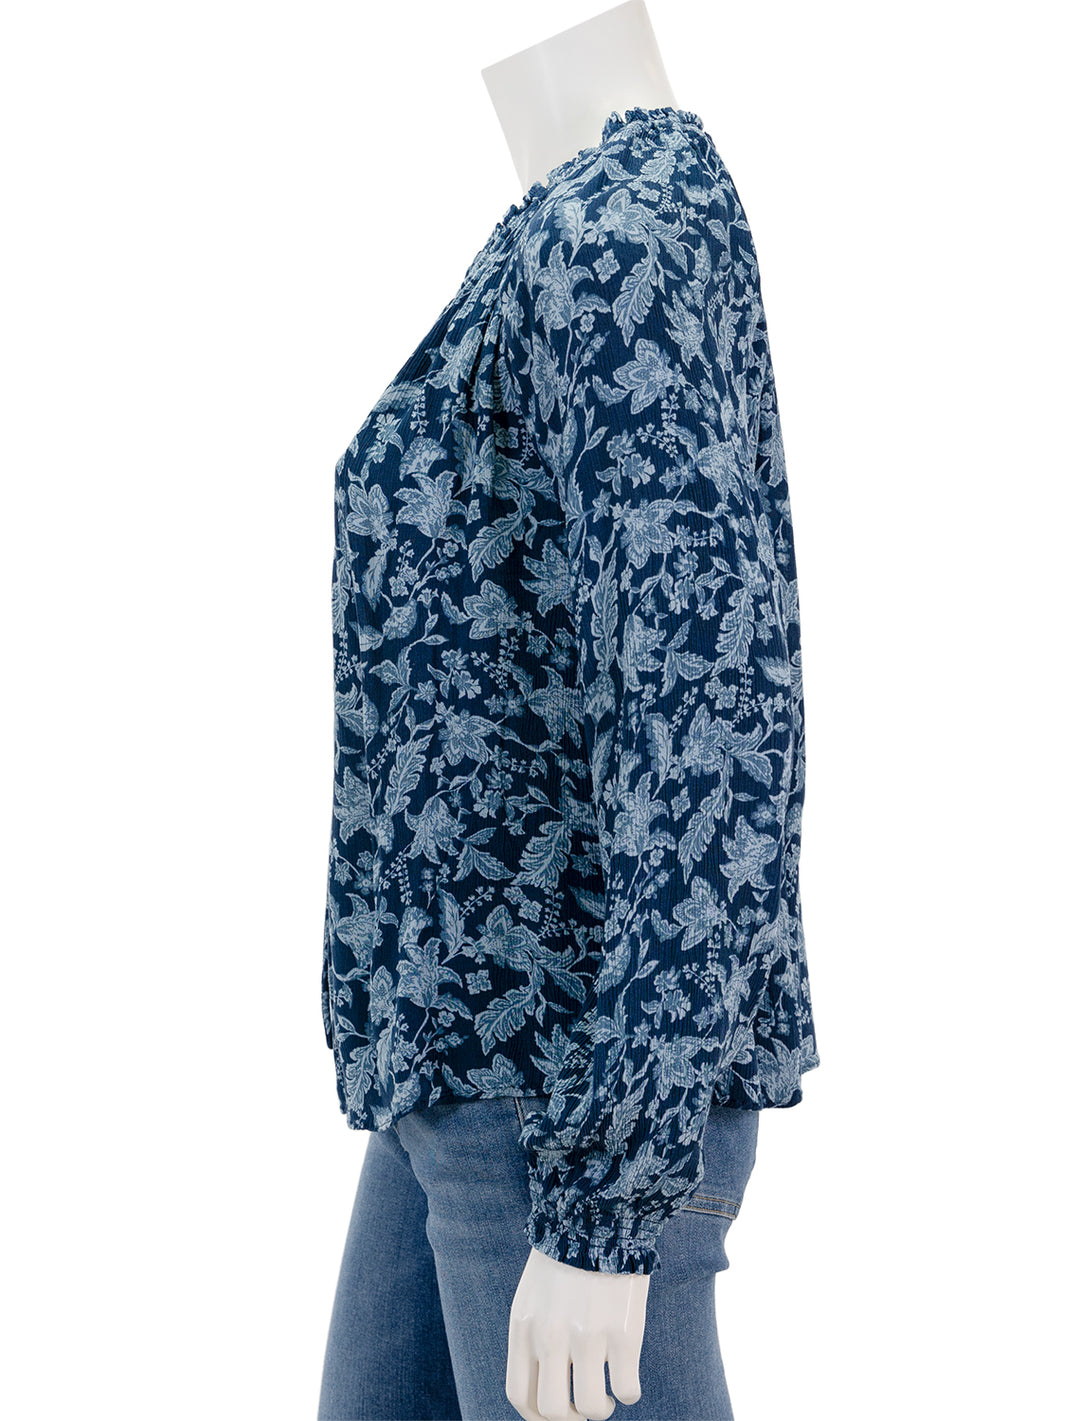 Side view of Faherty's emery blouse in blue esna floral.